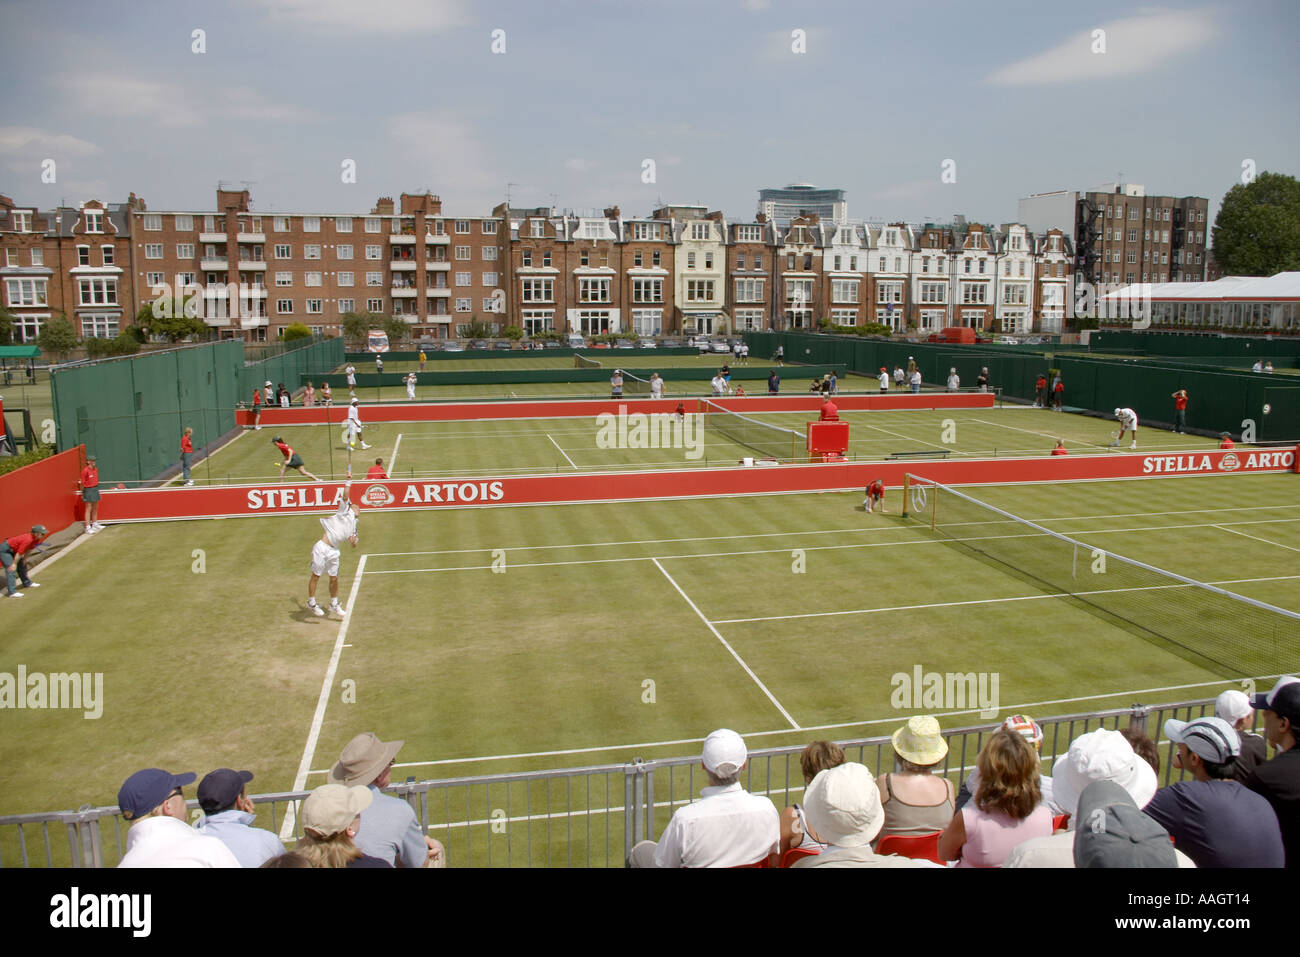 Stella Artois Queens Club tennis tournament courts and grounds Stock Photo